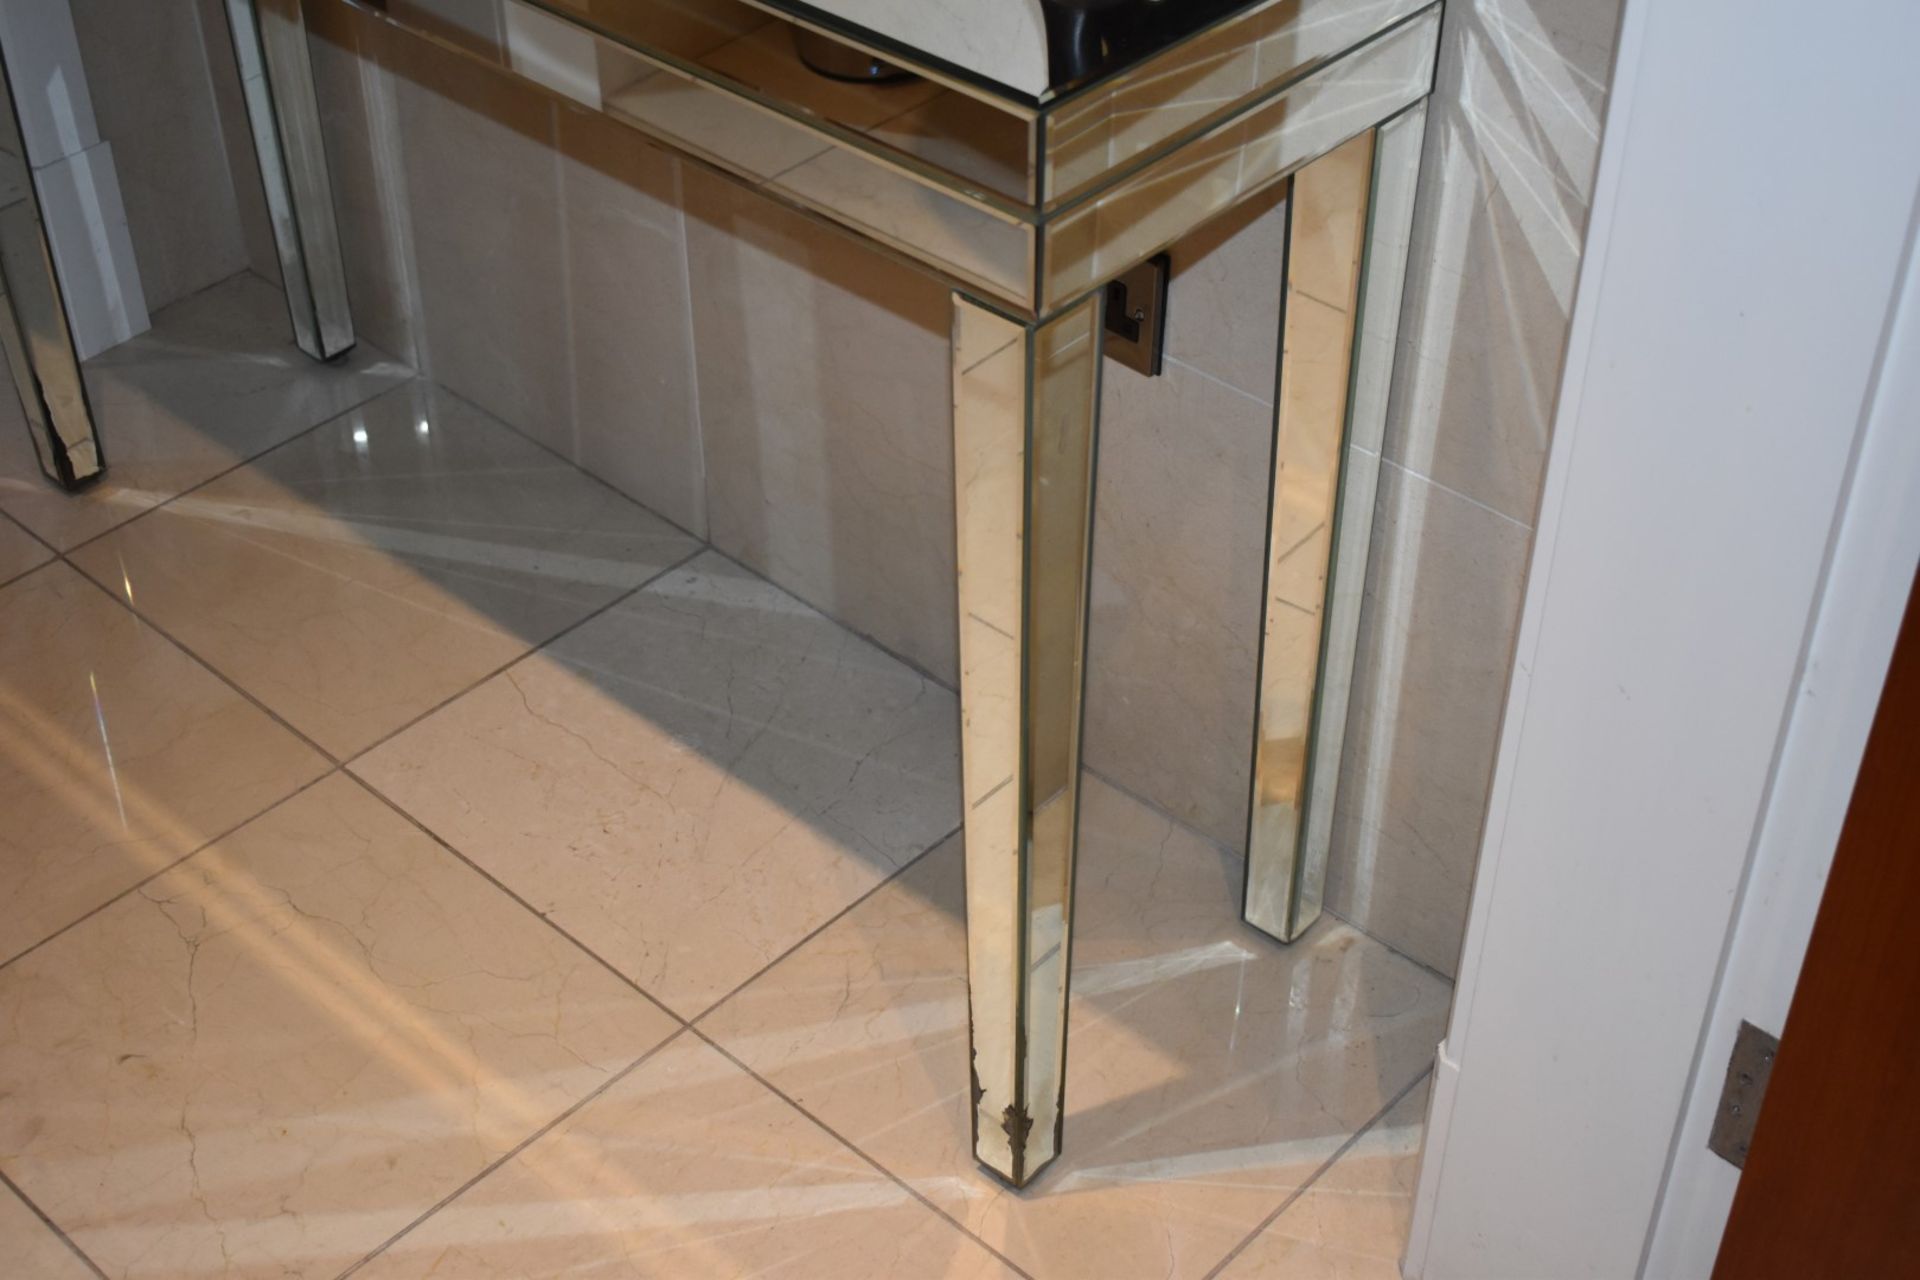 1 x Mirrored Console Table With Tapered Legs and Bevelled Glass Mirror Panels - Size: H79 x W120 x - Image 5 of 6